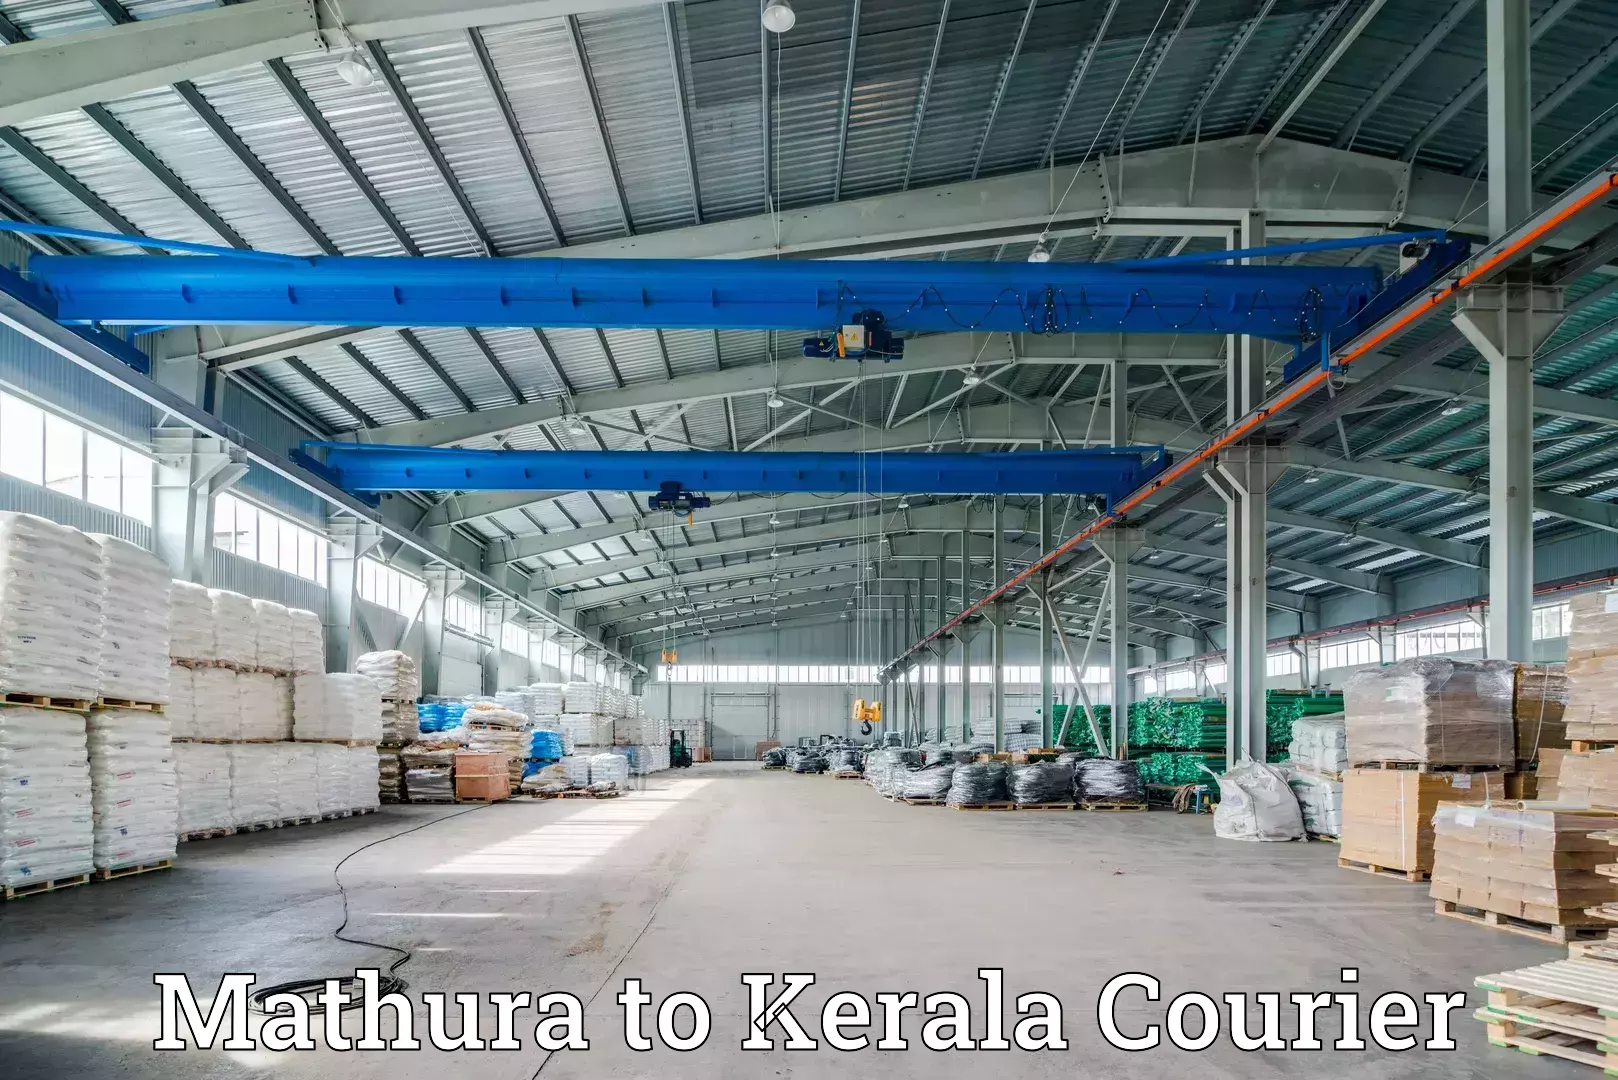 Express delivery network Mathura to Kerala